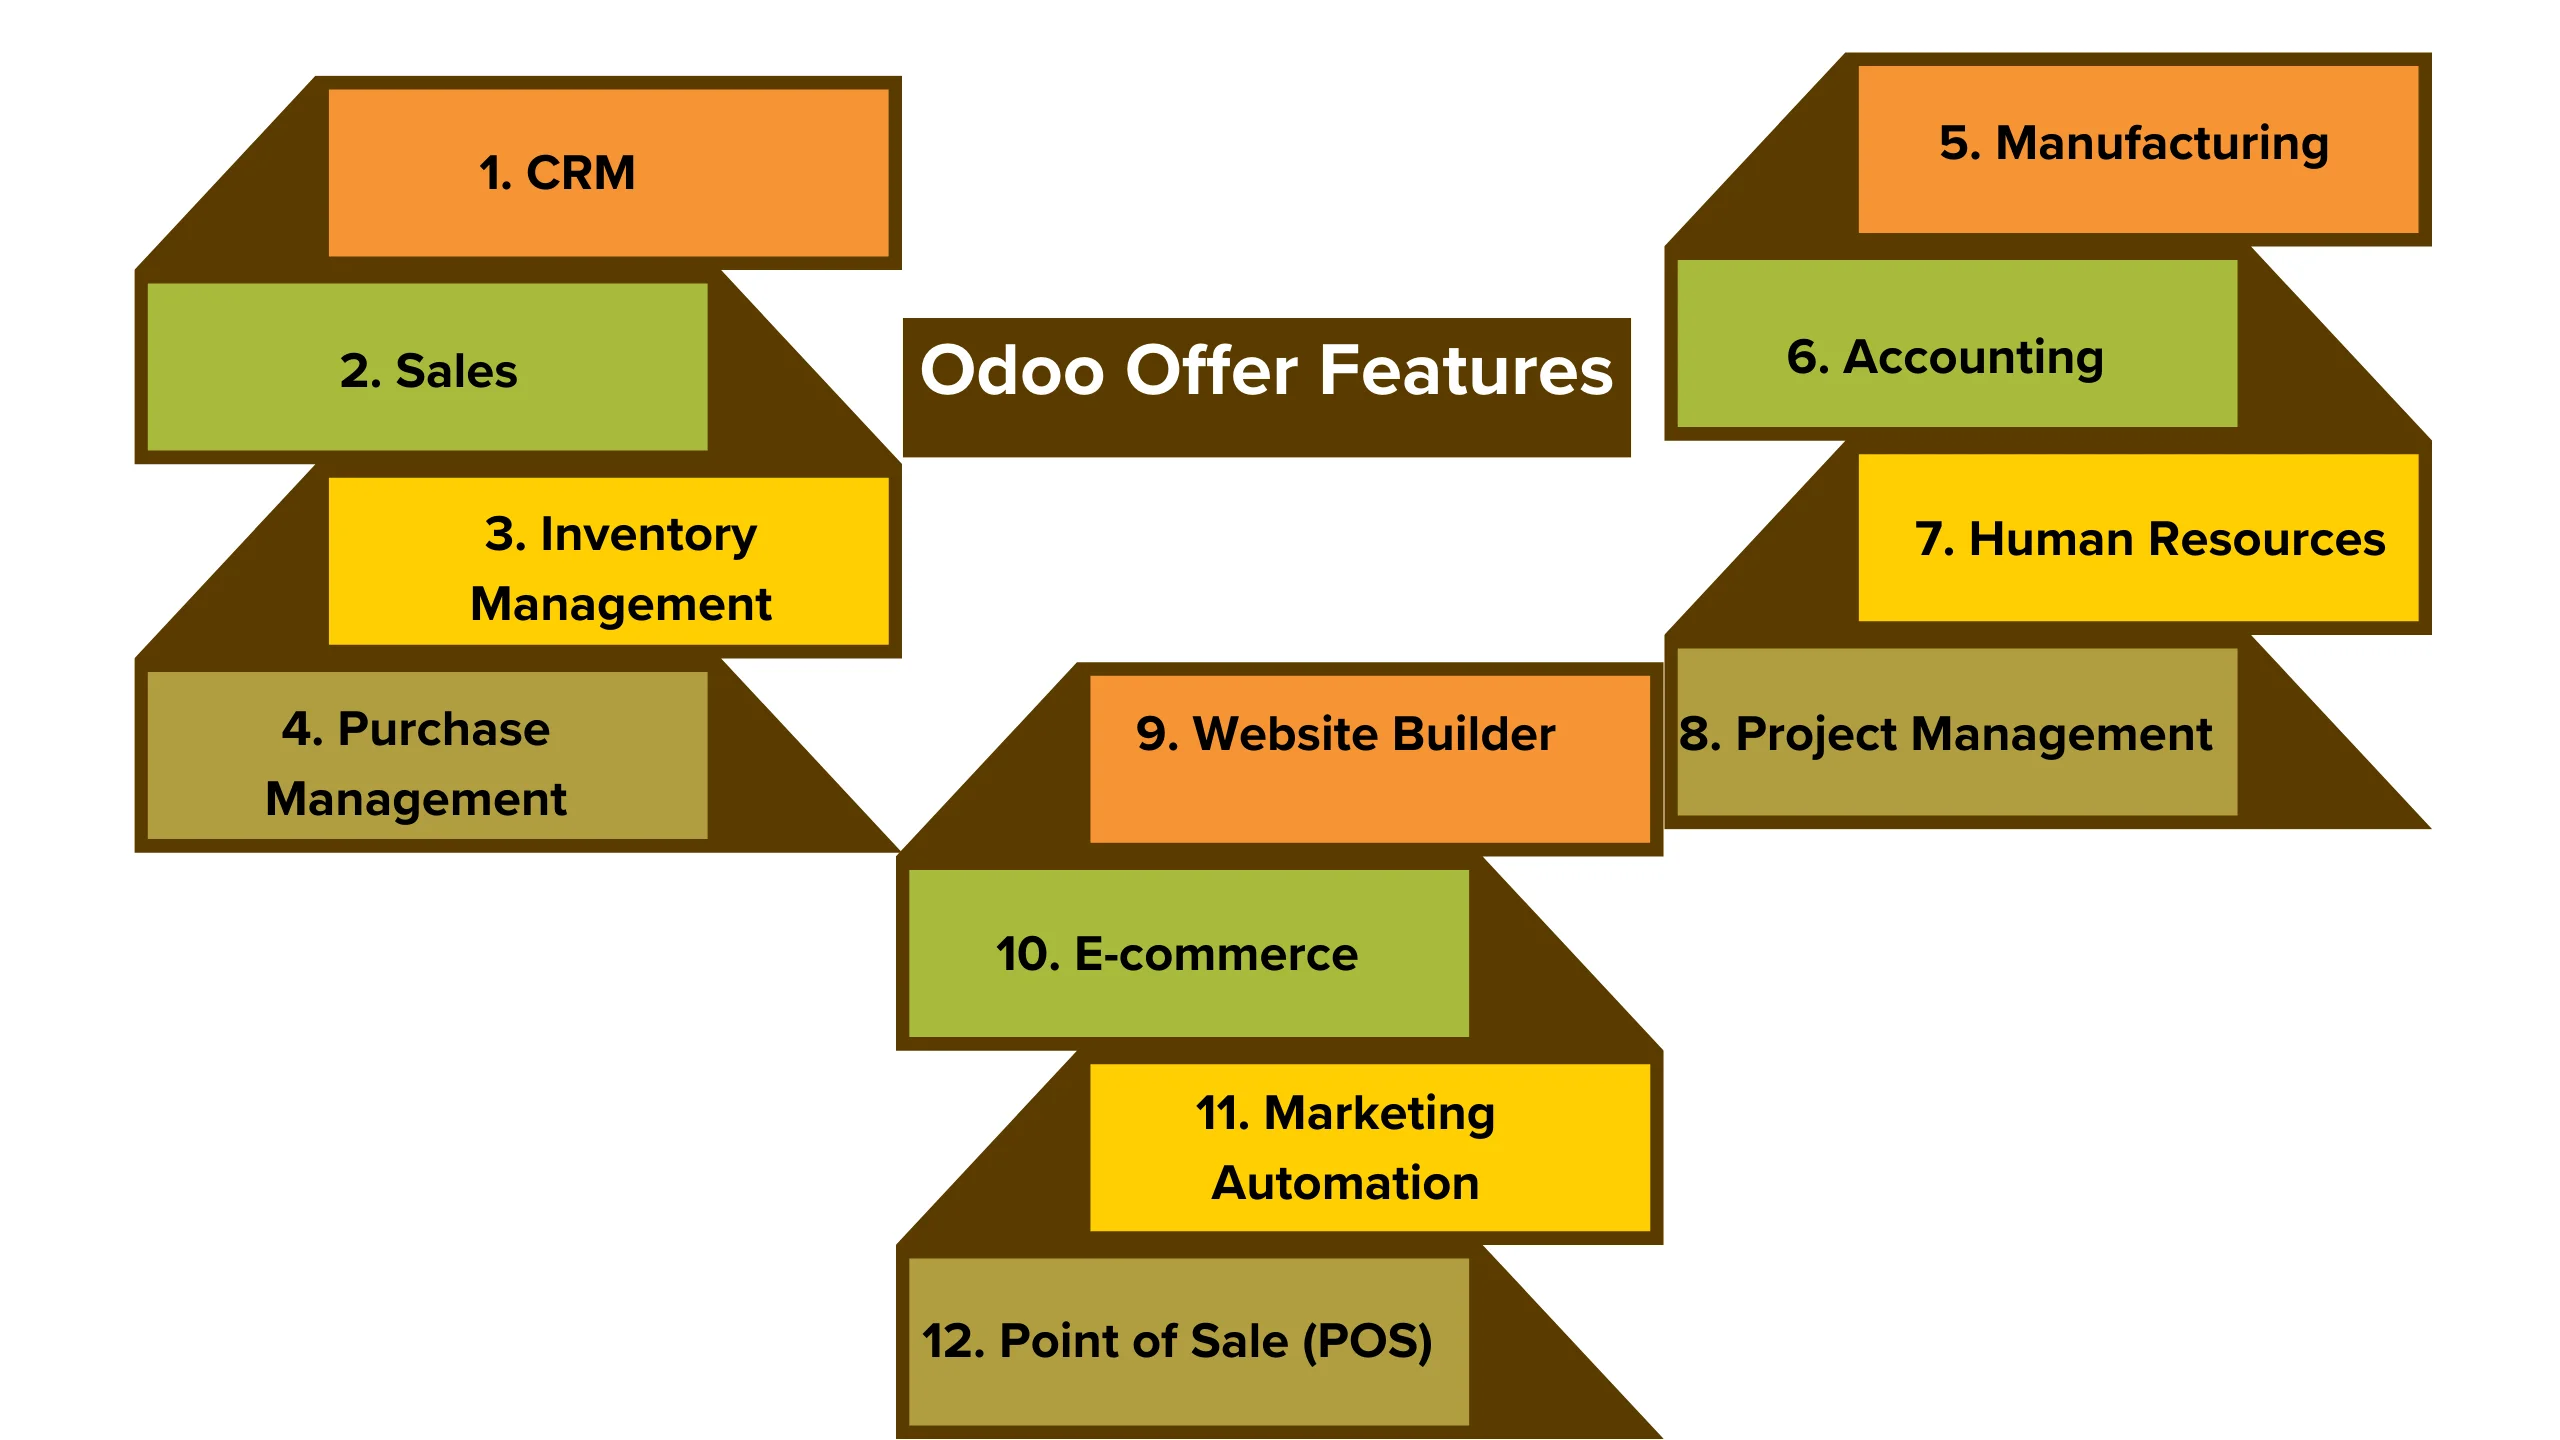 Odoo offers a wide range of features across various modules to help businesses manage different aspects